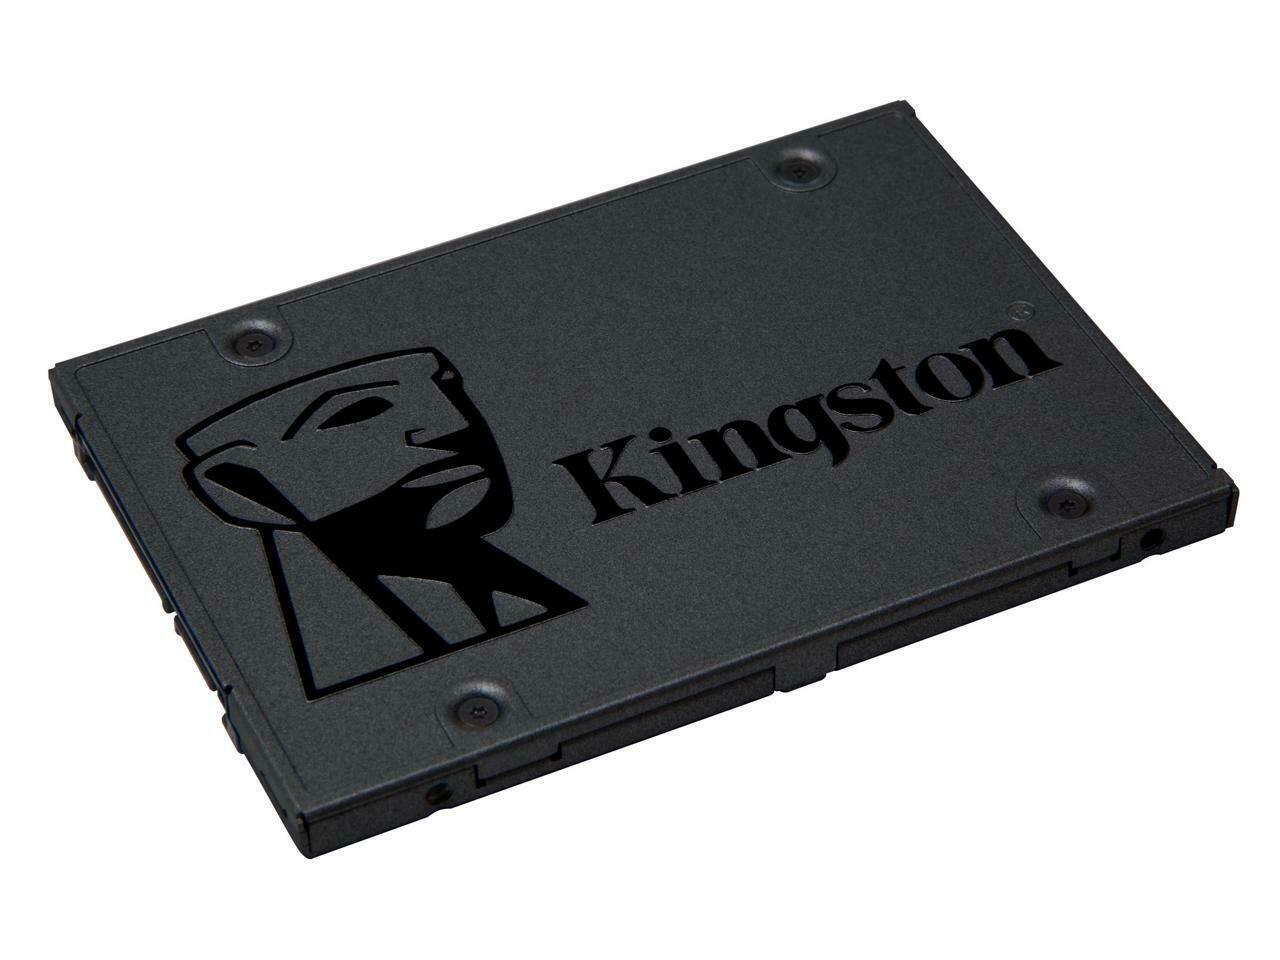 960GB Kingston A400 3D NAND SATA SSD Solid State Drive for $64.99 Shipped